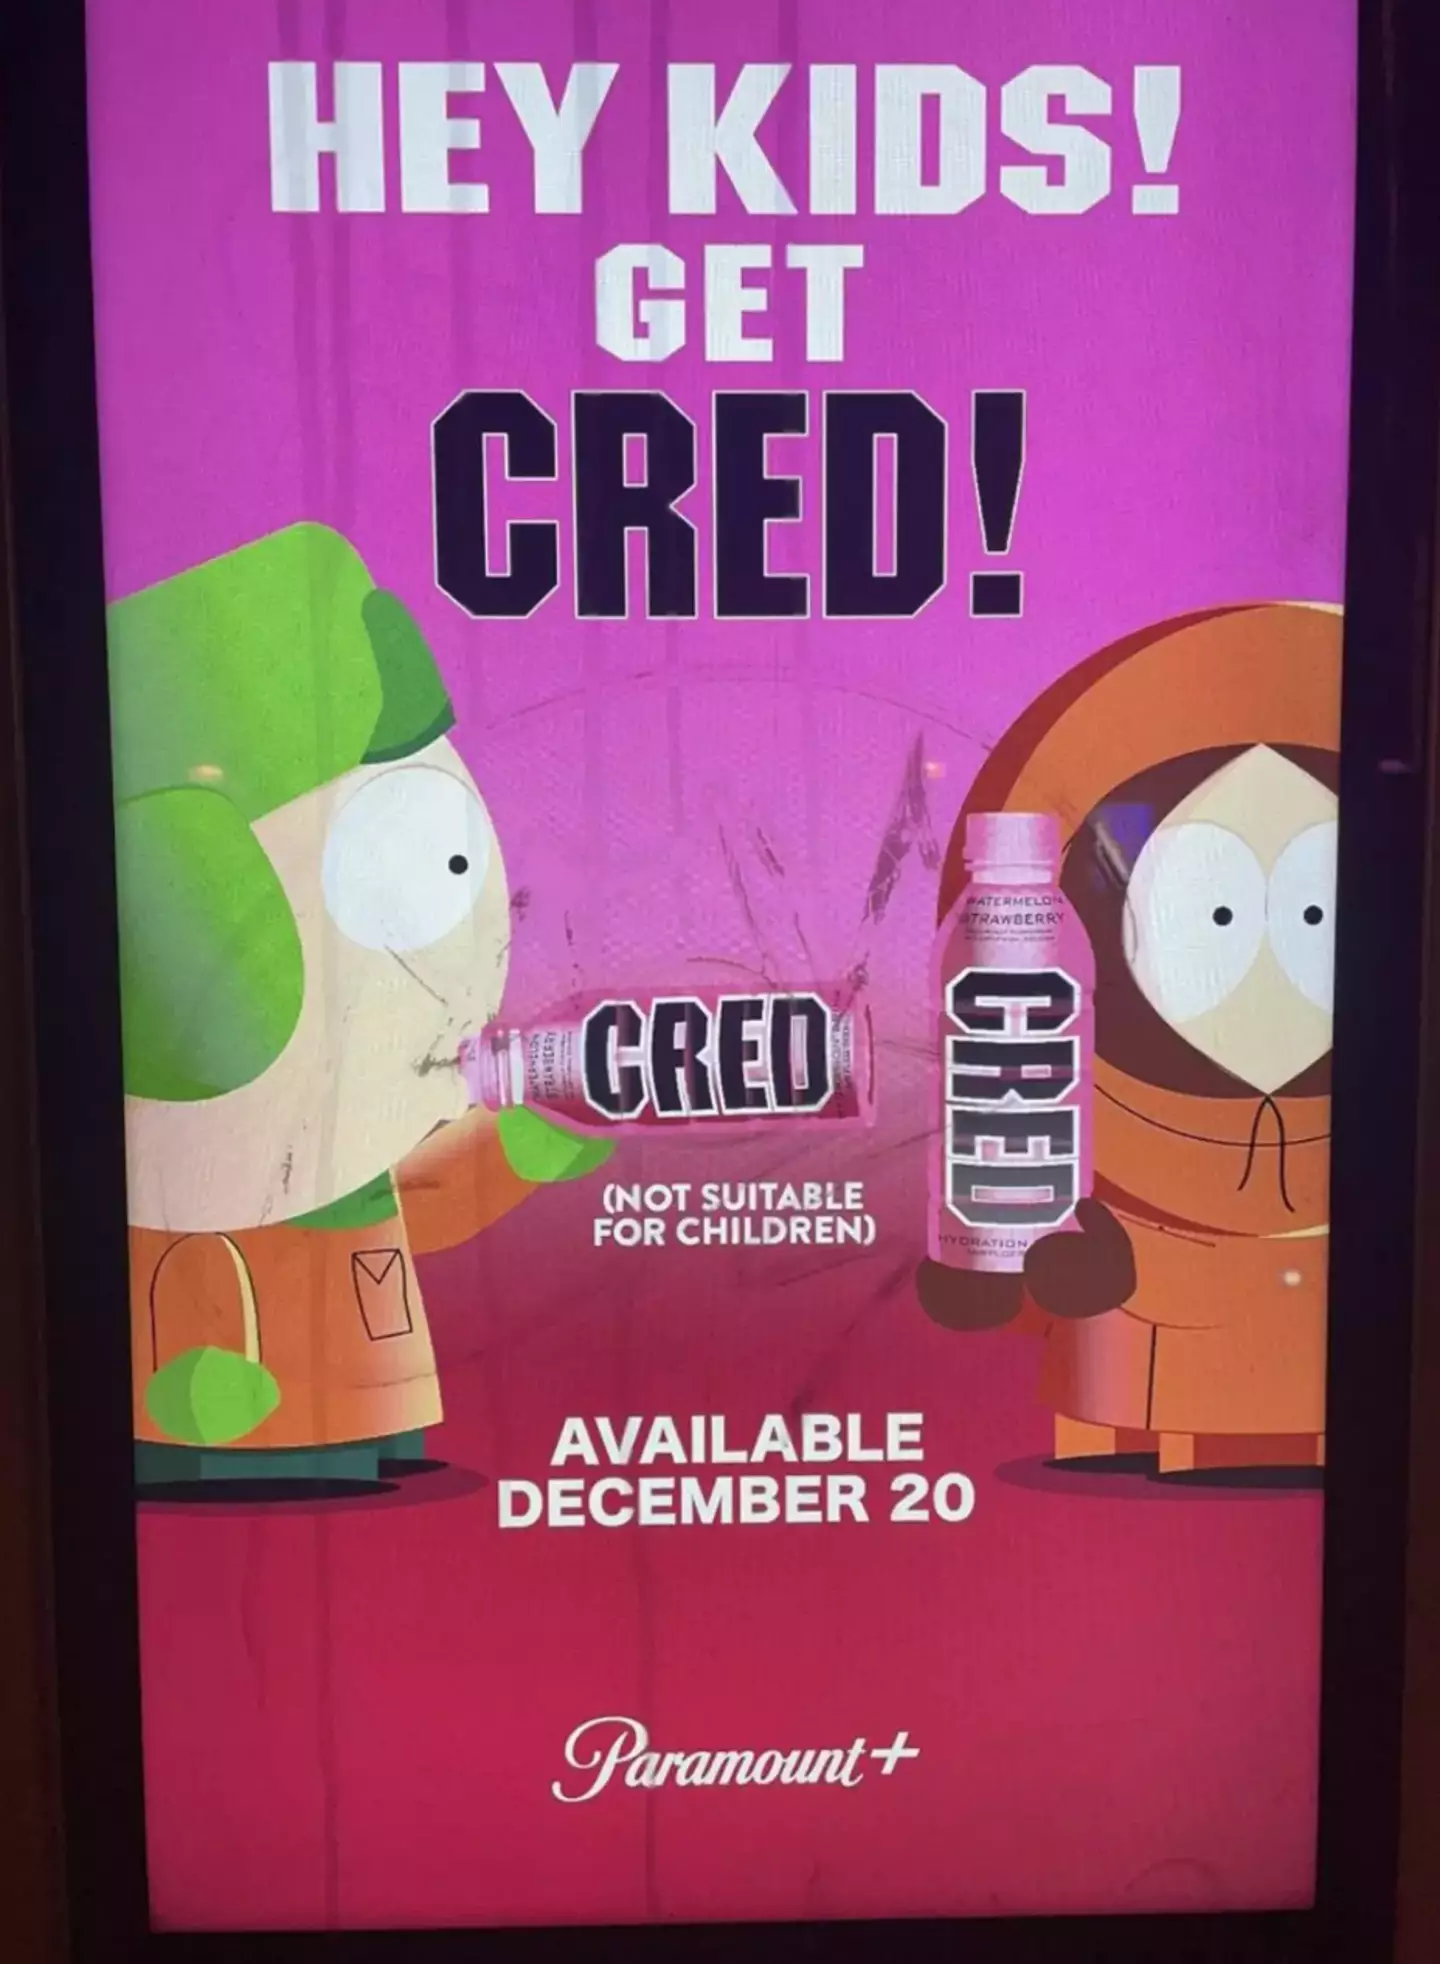 Promotional posters saw Kyle and Kenny drinking bottles of CRED.